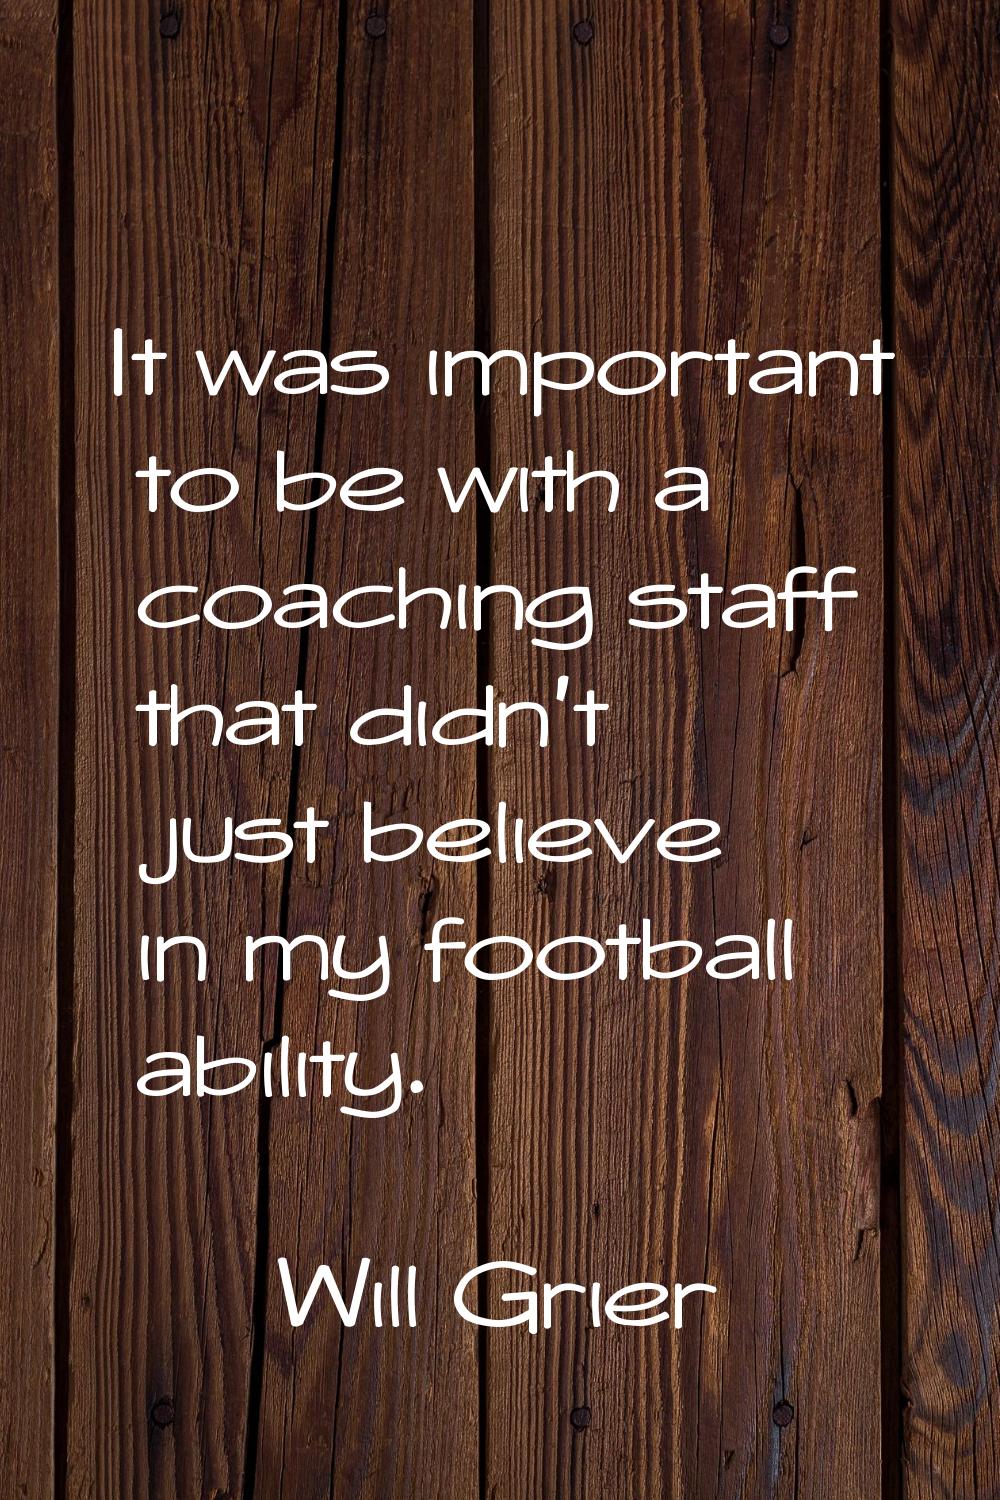 It was important to be with a coaching staff that didn't just believe in my football ability.